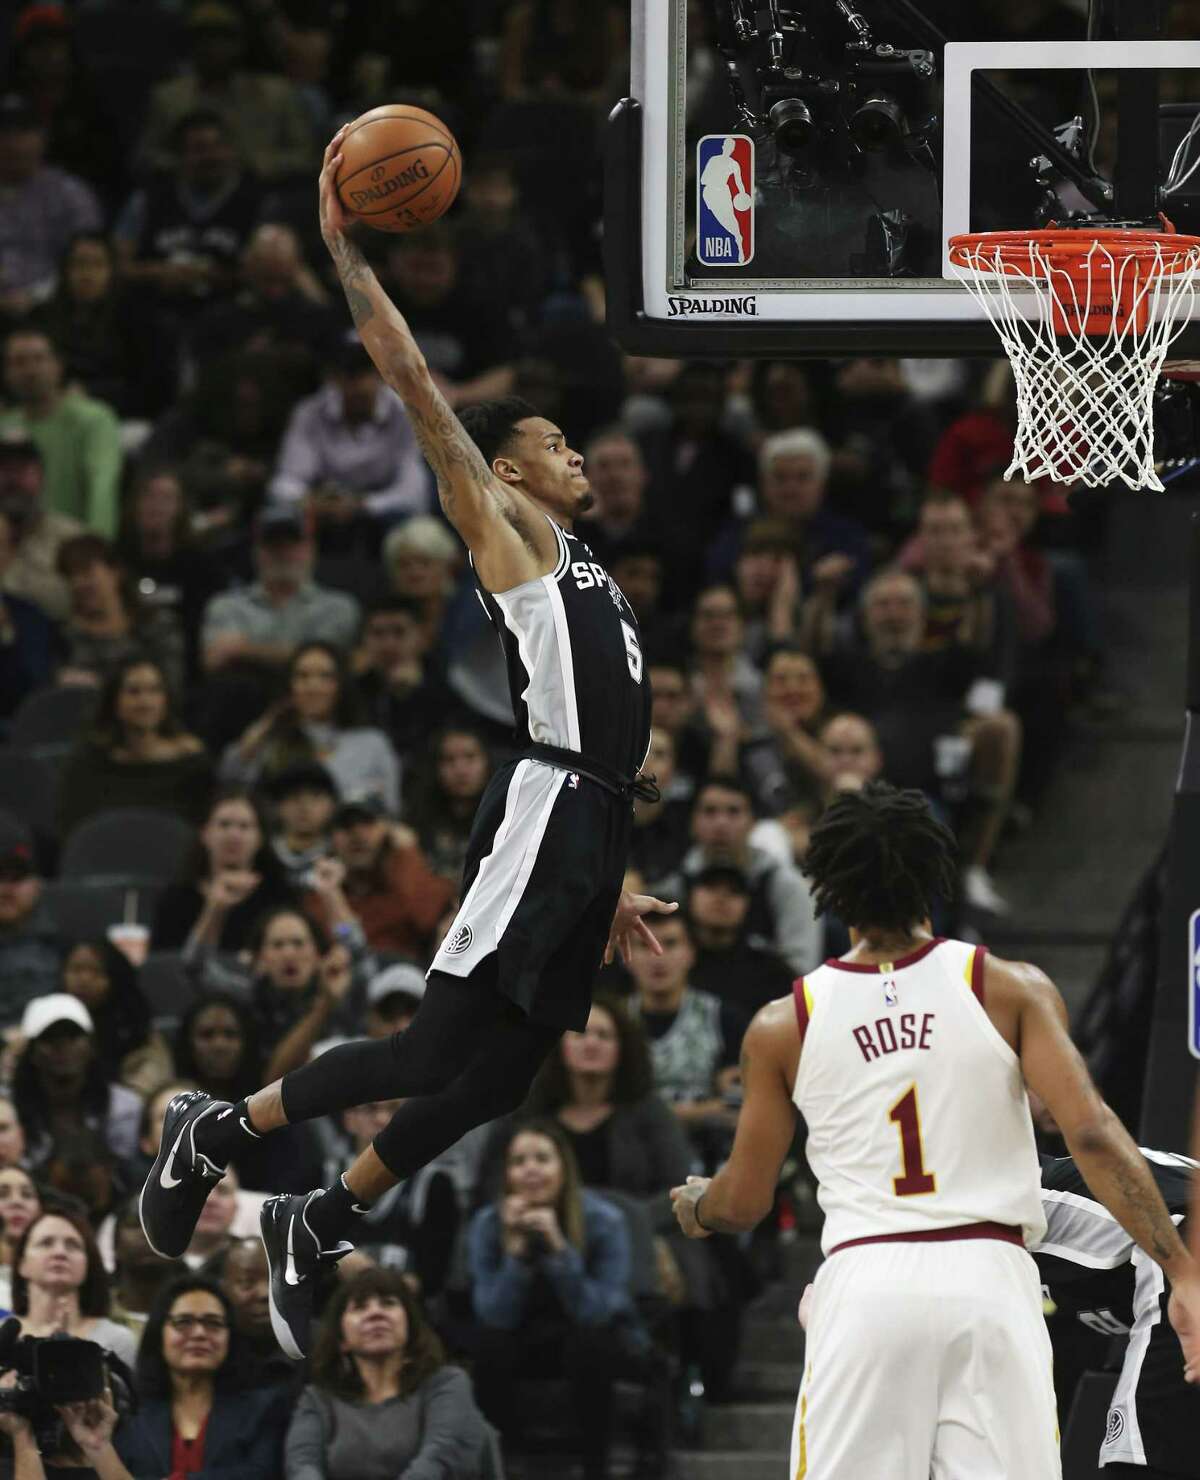 Spurs' Dejounte Murray (05) rears back for dunk against Cleveland Cavaliers' Derrick Rose (01) at the AT&T Center on Tuesday, Jan. 23, 2018. Spurs defeated the Cavs, 114-102. (Kin Man Hui/San Antonio Express-News)